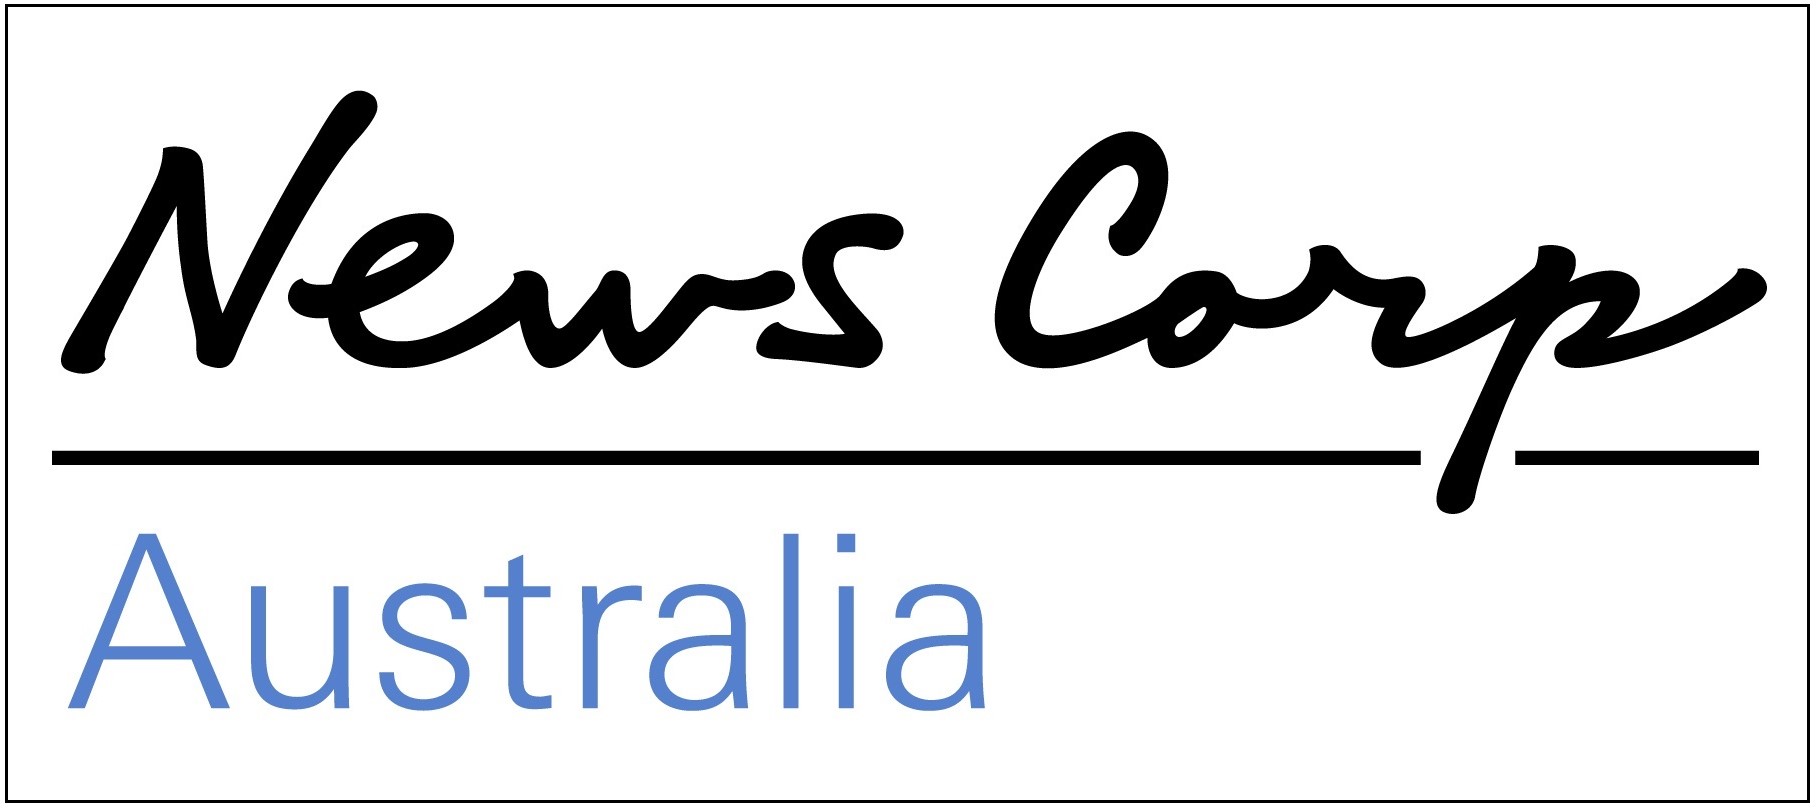 News Corp Australia called to account over poor delivery times